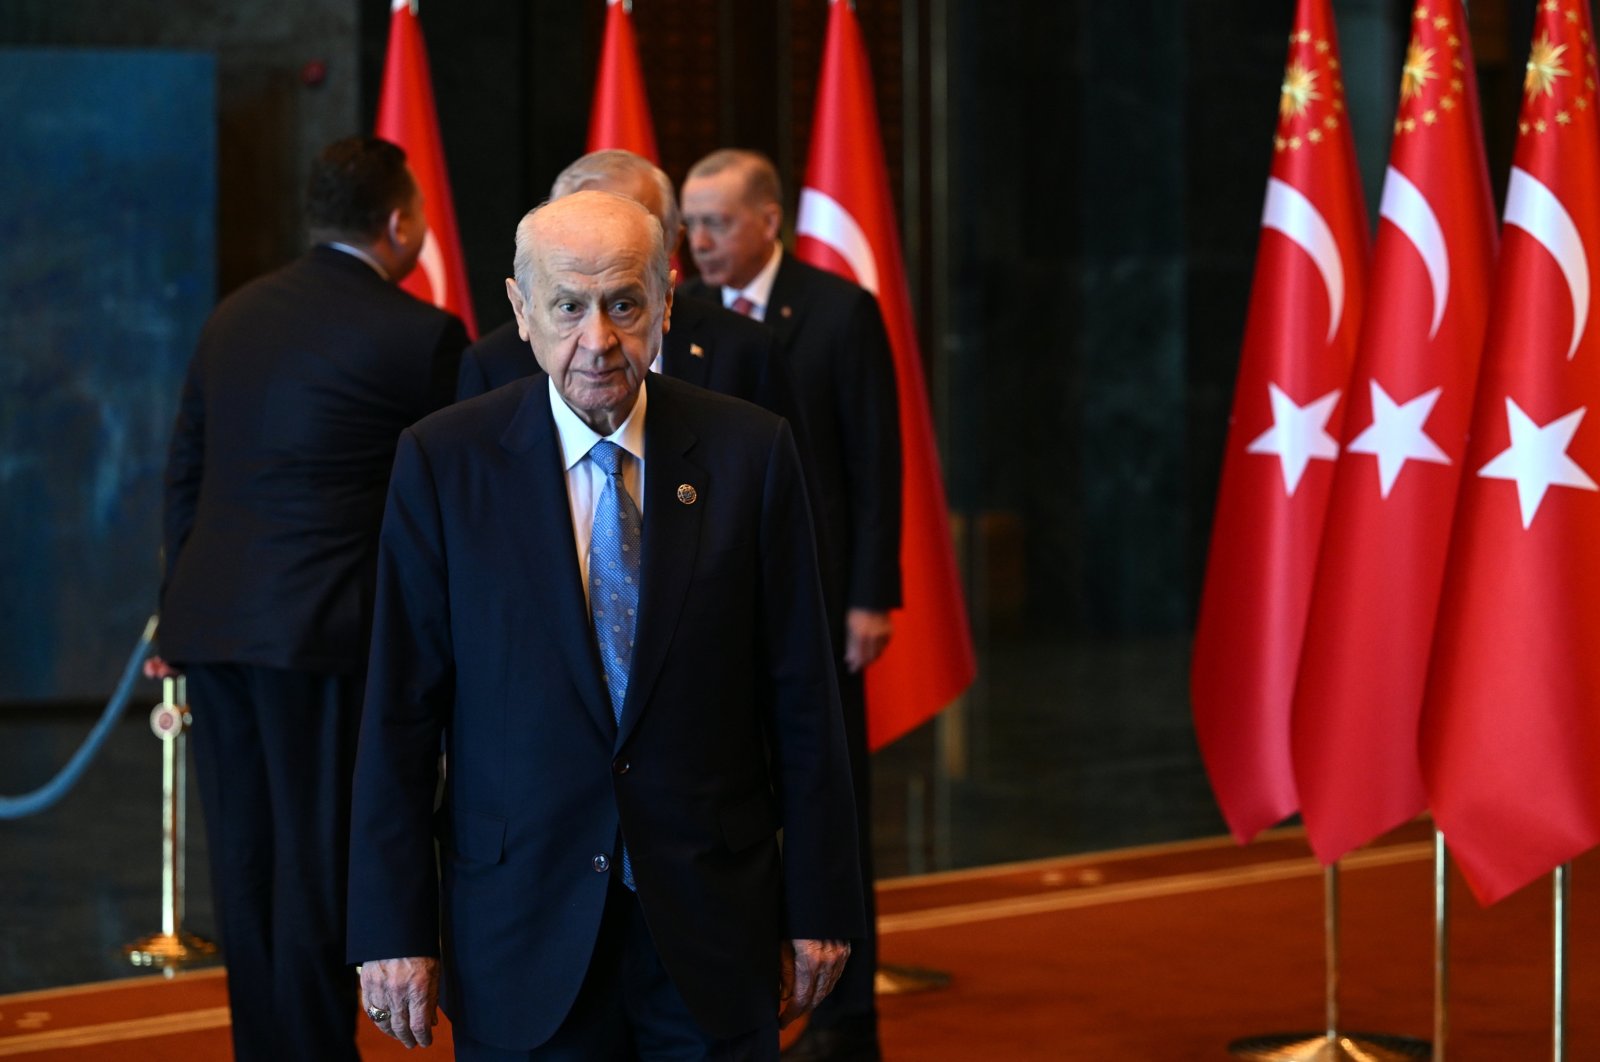 Nationalist Movement Party (MHP) Chairperson Devlet Bahçeli is seen after shaking hands with President Recep Tayyip Erdoğan at the Presidential Complex, Ankara, Türkiye, Aug. 30, 2023. (AA Photo)